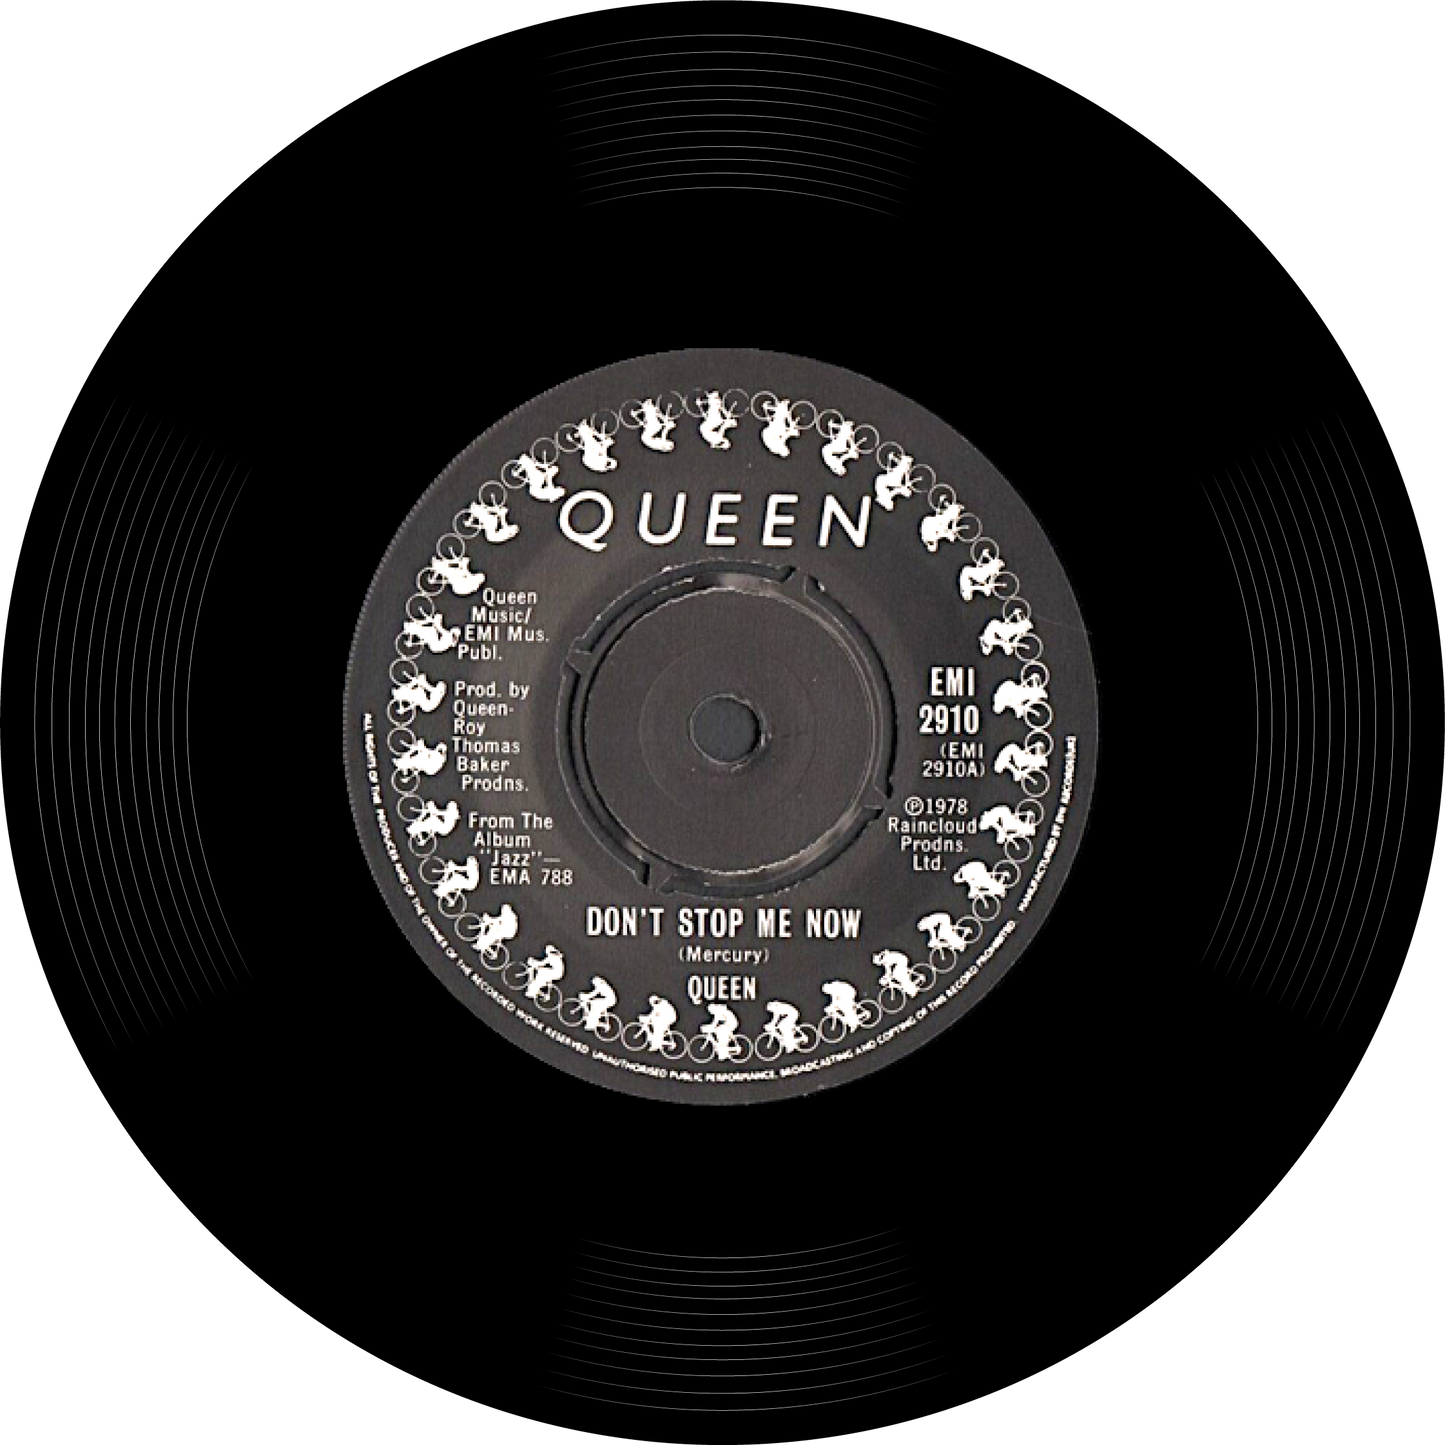 Queen, Don't Stop Me Now, Vinyl Record Round Mat (Can also be used as sound damper on wall) - Posterify